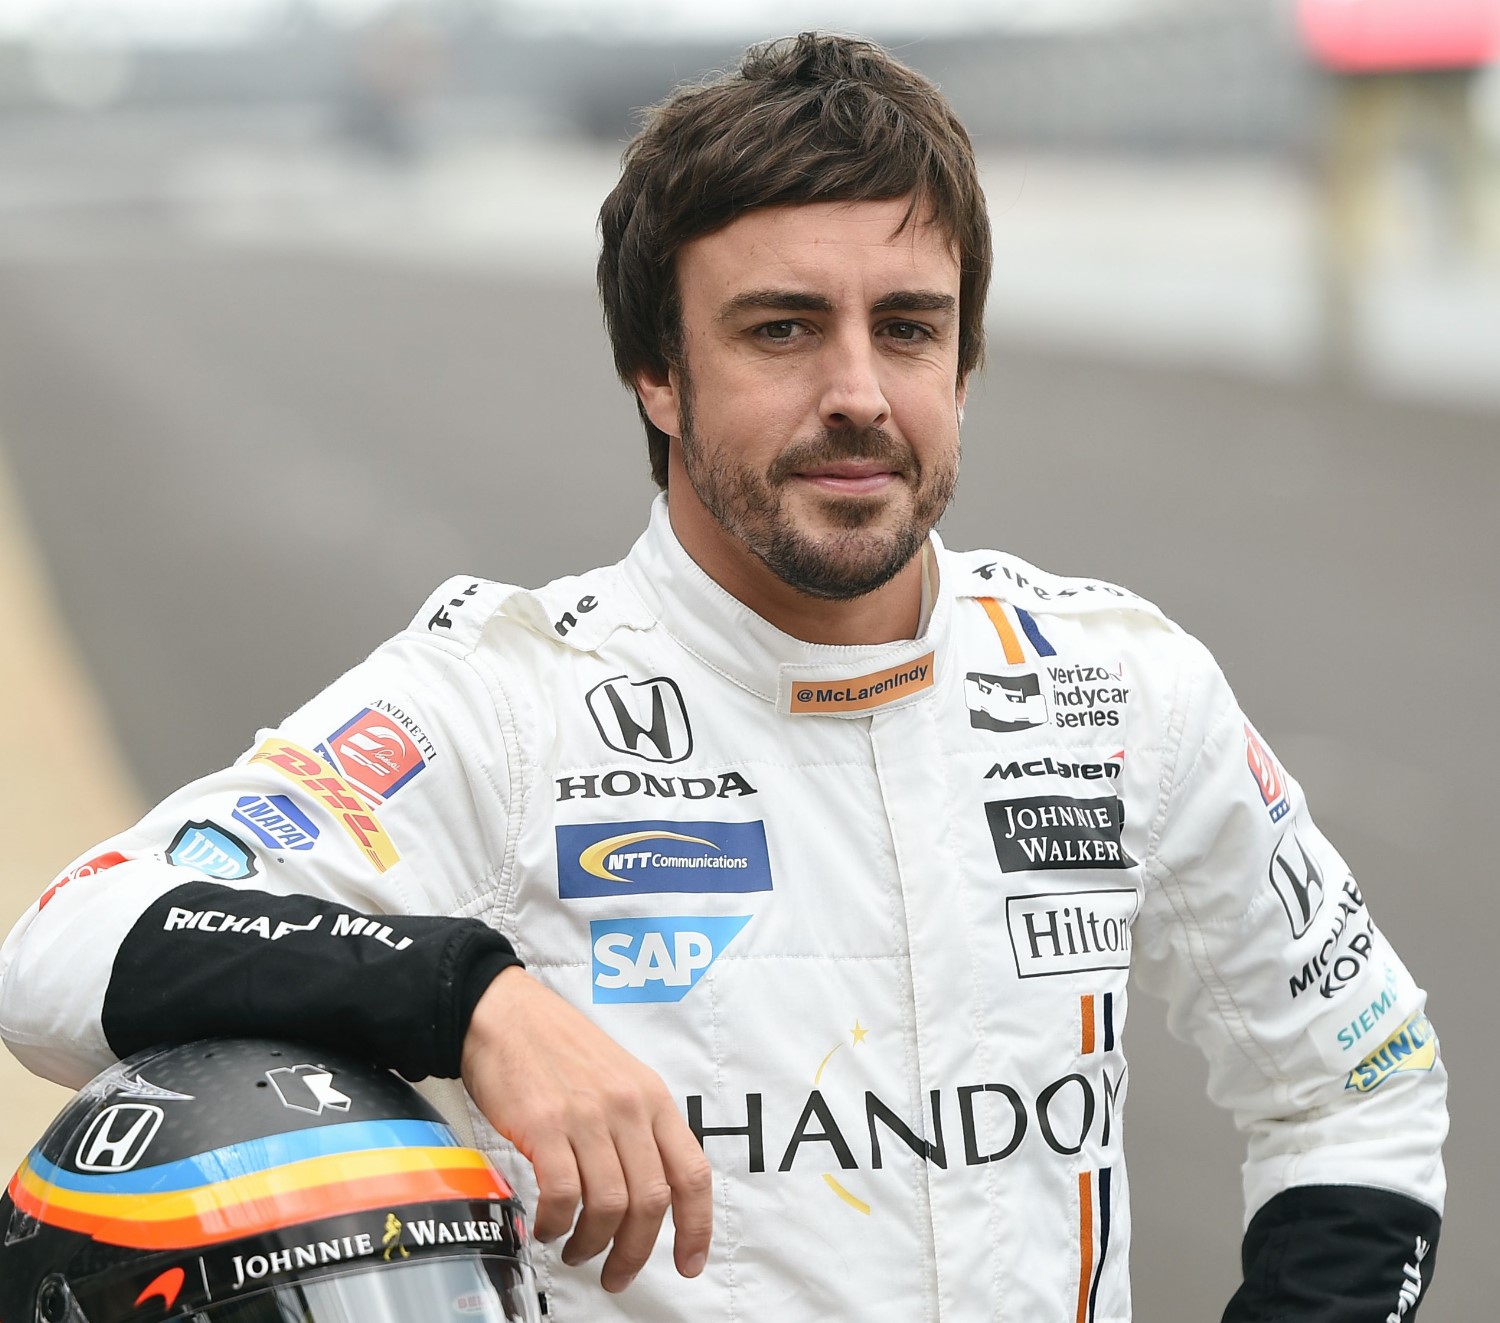 Alonso like the USA. Is that a hint for the future?